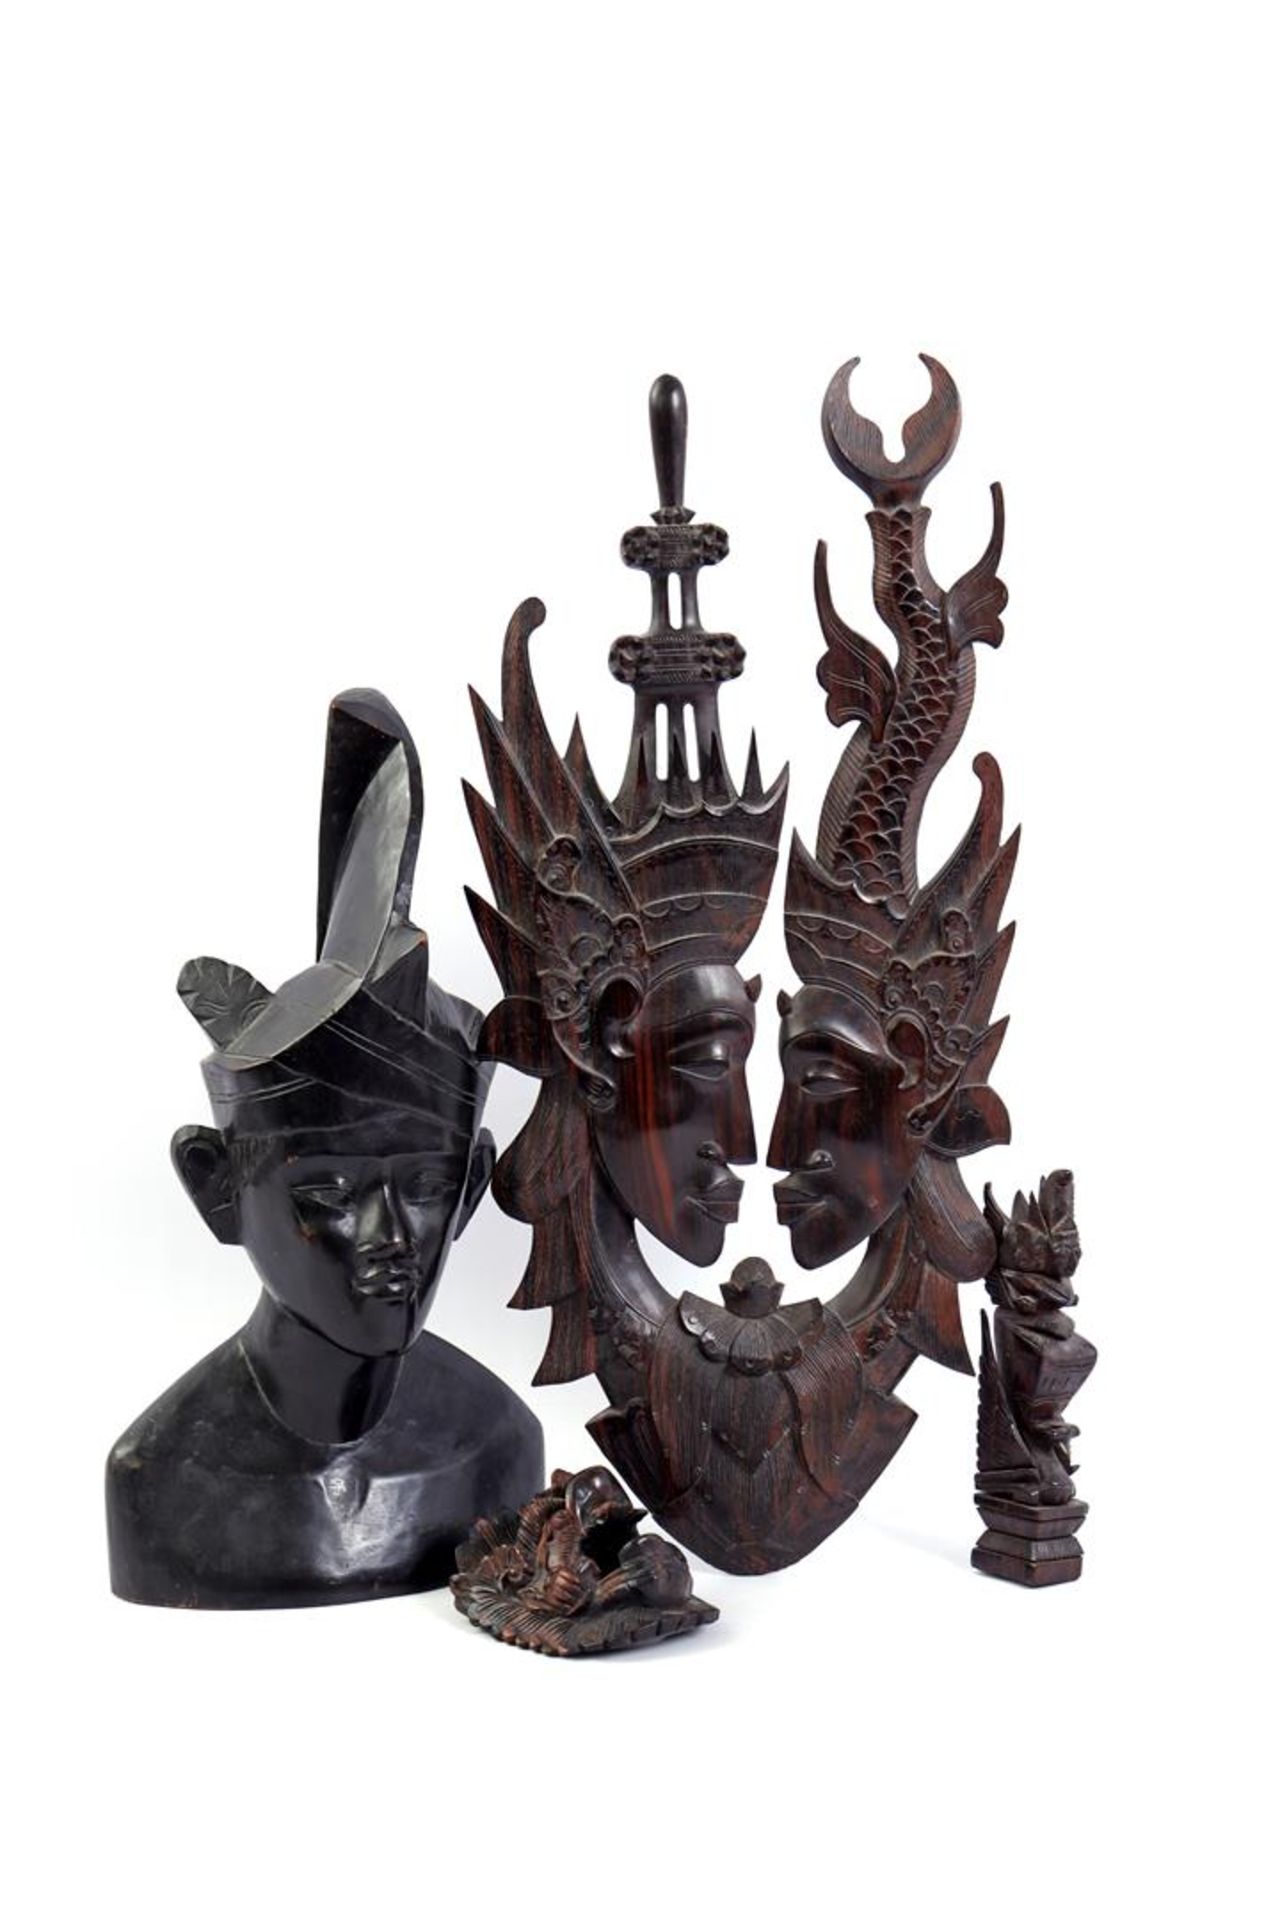 4 carvings, bust of a Javanese man, 38 cm high, wall plaque 52x25 cm, mask of temple lion and figuri